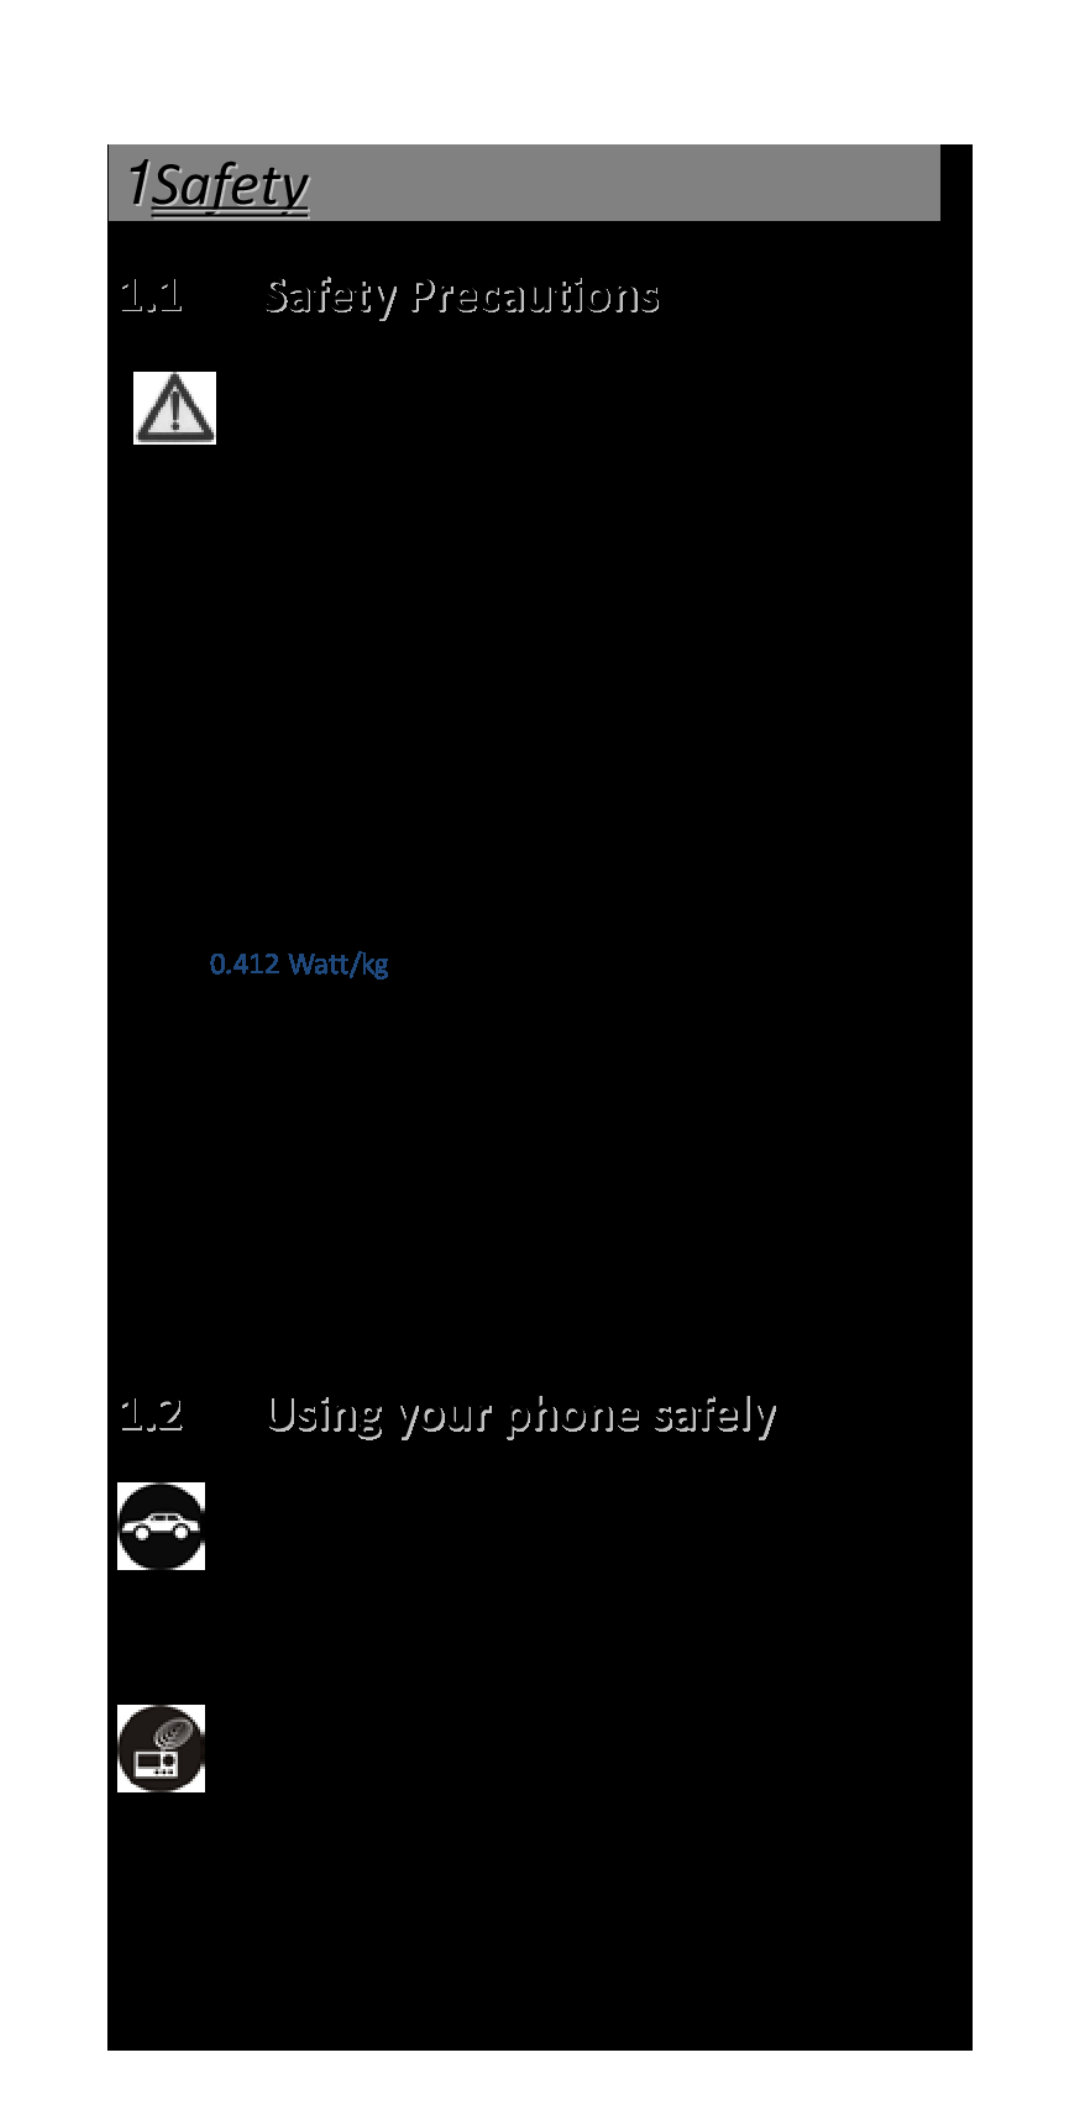 Haier P-867 user manual 1Safety, Safety Precautions, Using your phone safely, On The Road, Near Sensitive Electronics 